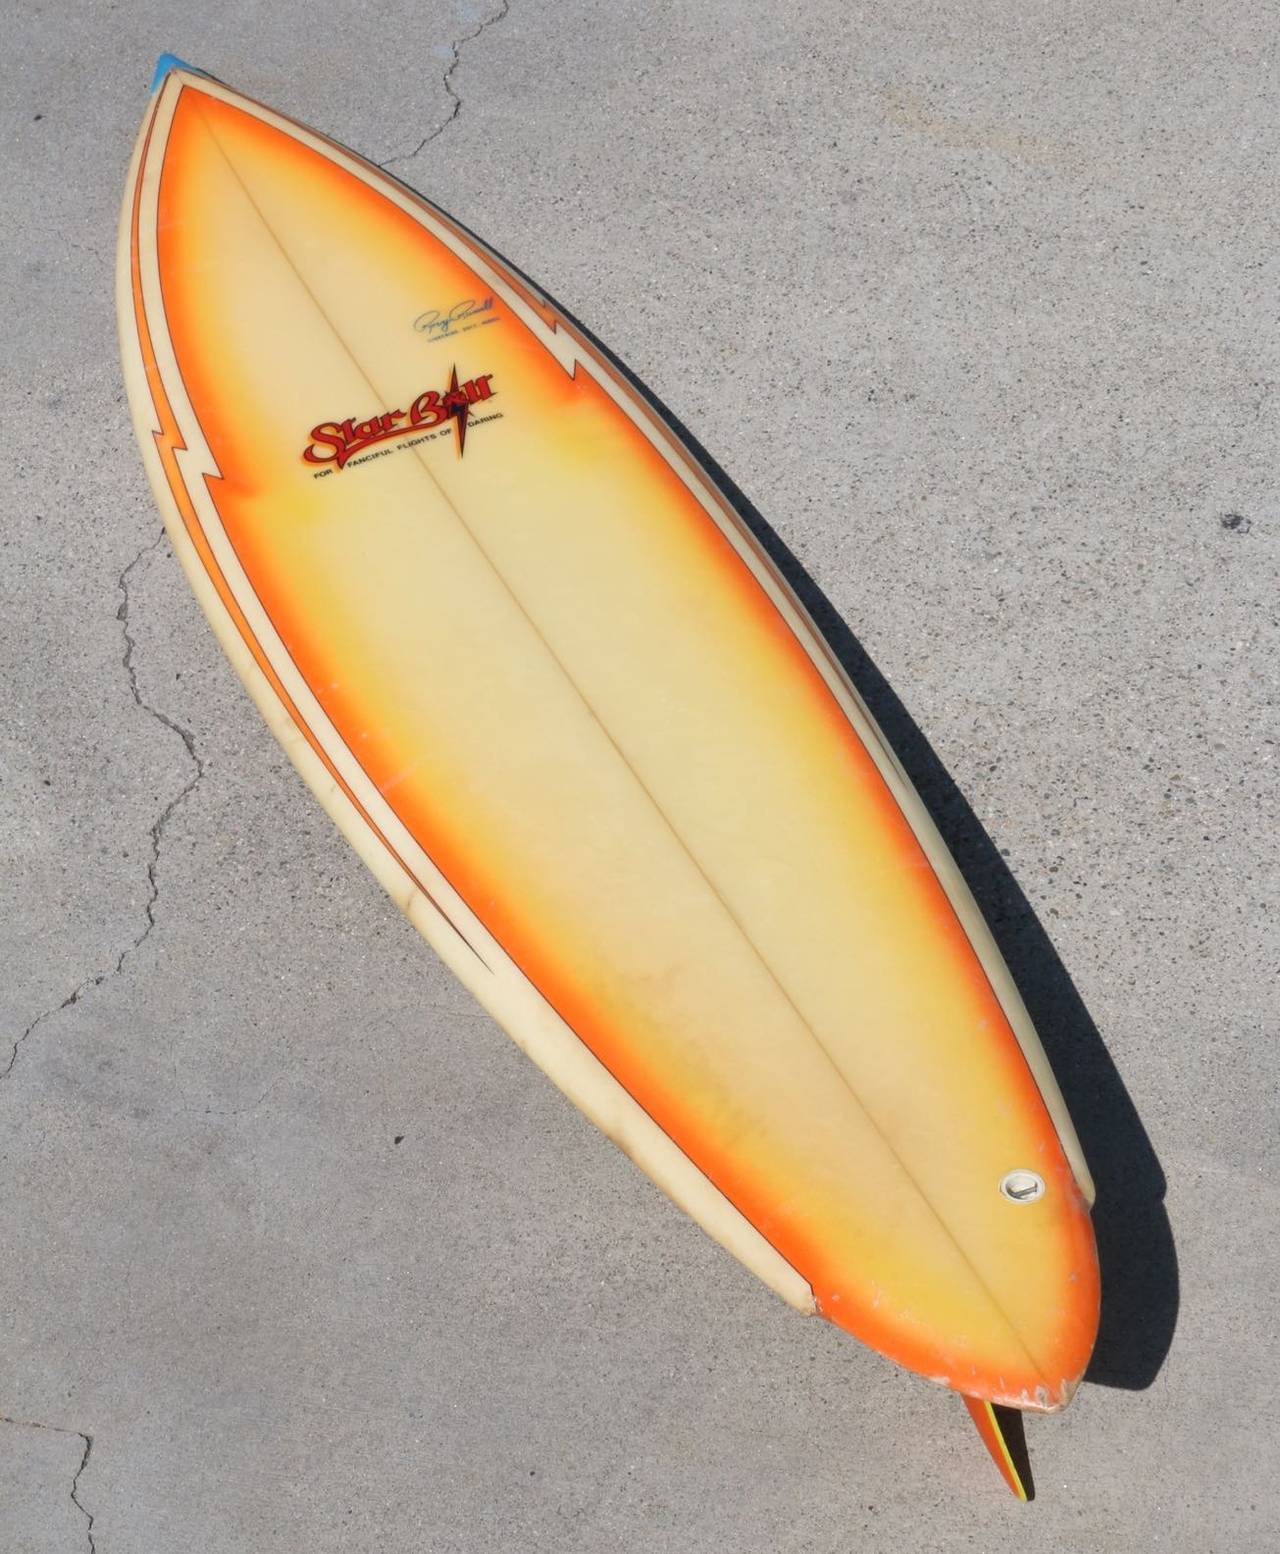 “Star Bolt - For Fanciful Flights of Daring” is emblazzoned on the front of this 6’ surfboard. The shape, the size, the color and the graphics all contribute to the vision we have of this baby flying across the water - even as we see it hanging on